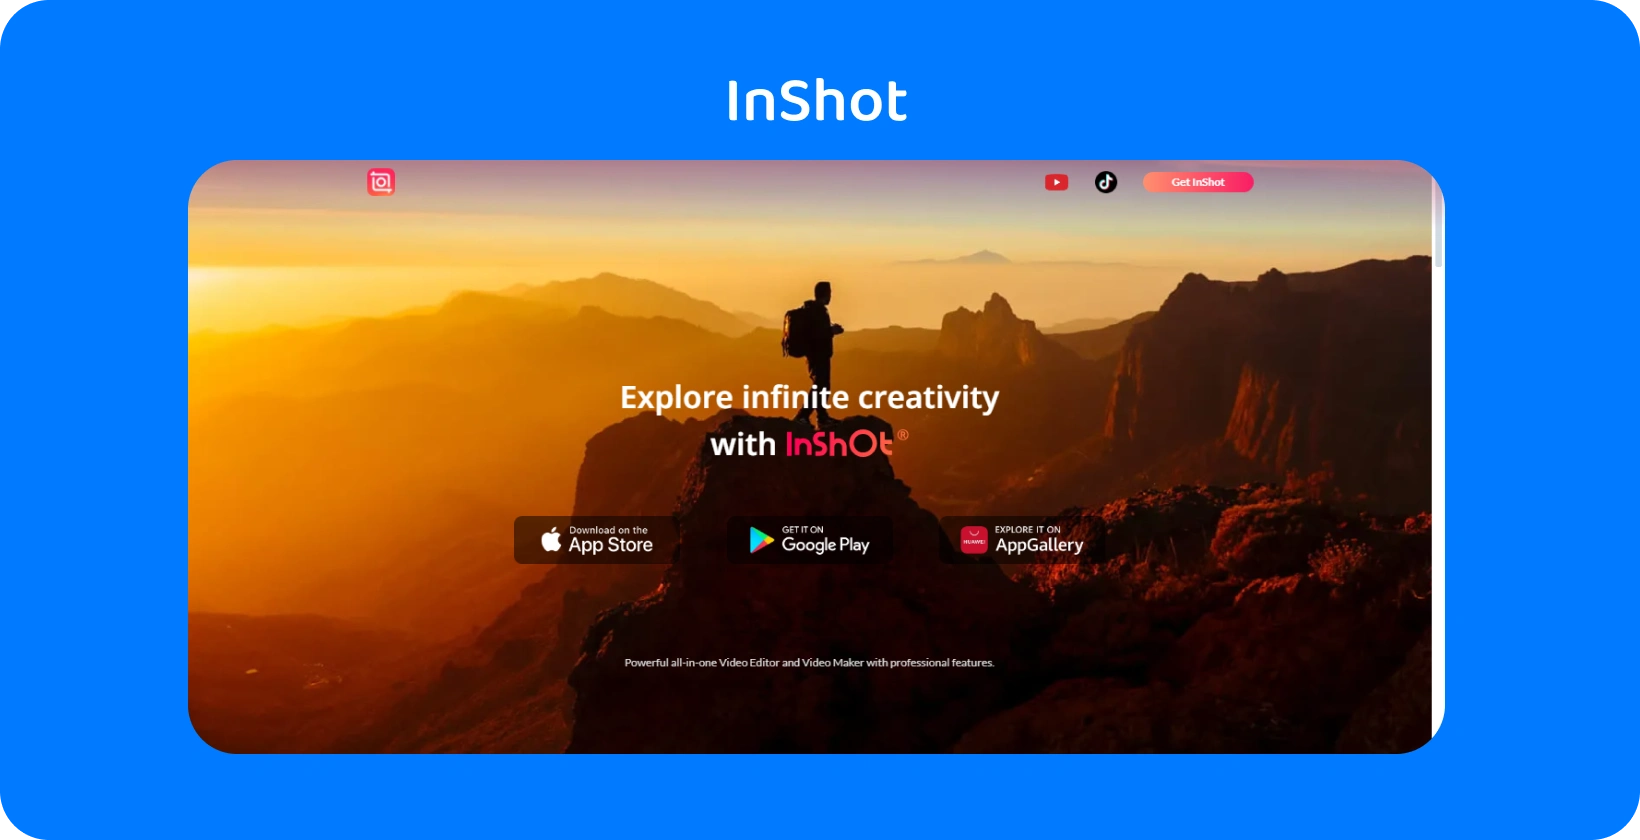 InShot app’s ad featuring a hiker at sunset, symbolizing the app's promise to explore infinite creativity in video editing.
